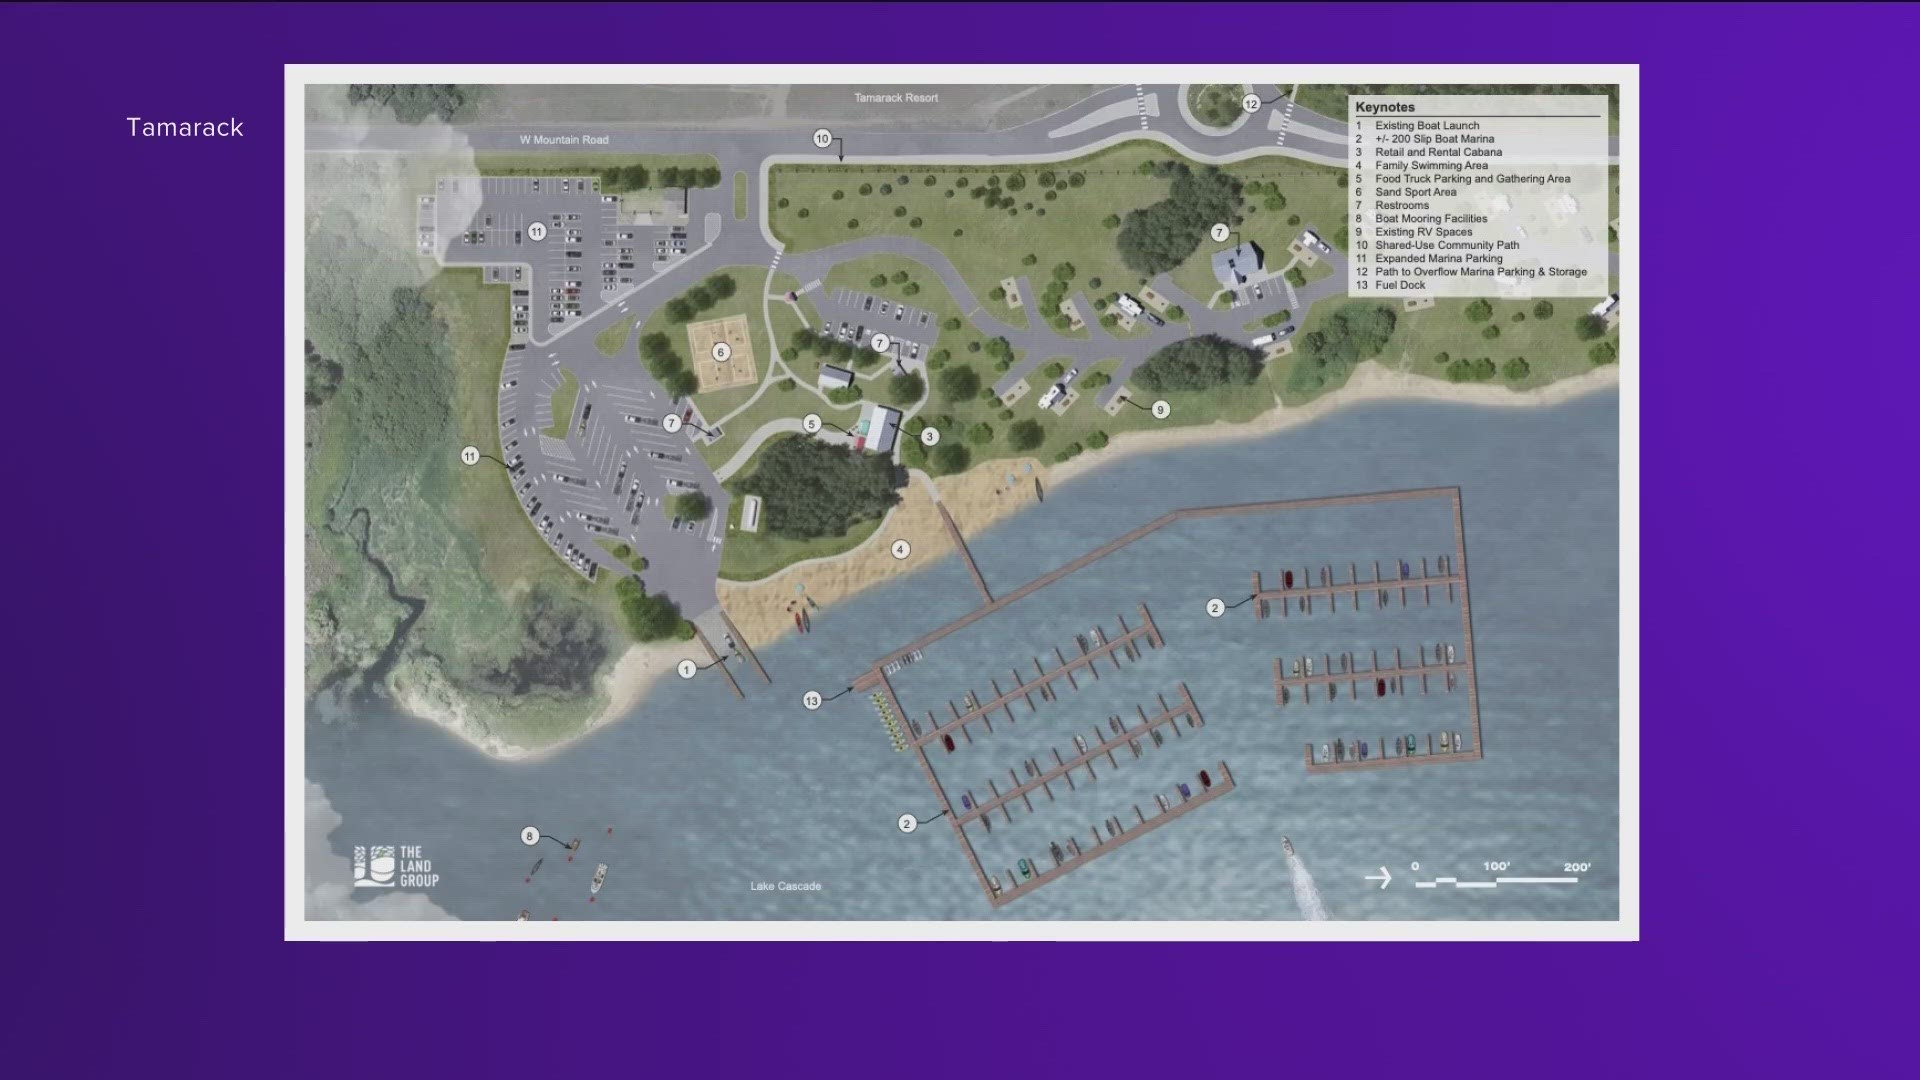 Tamarack plans to open the marina as soon as summer of 2024.